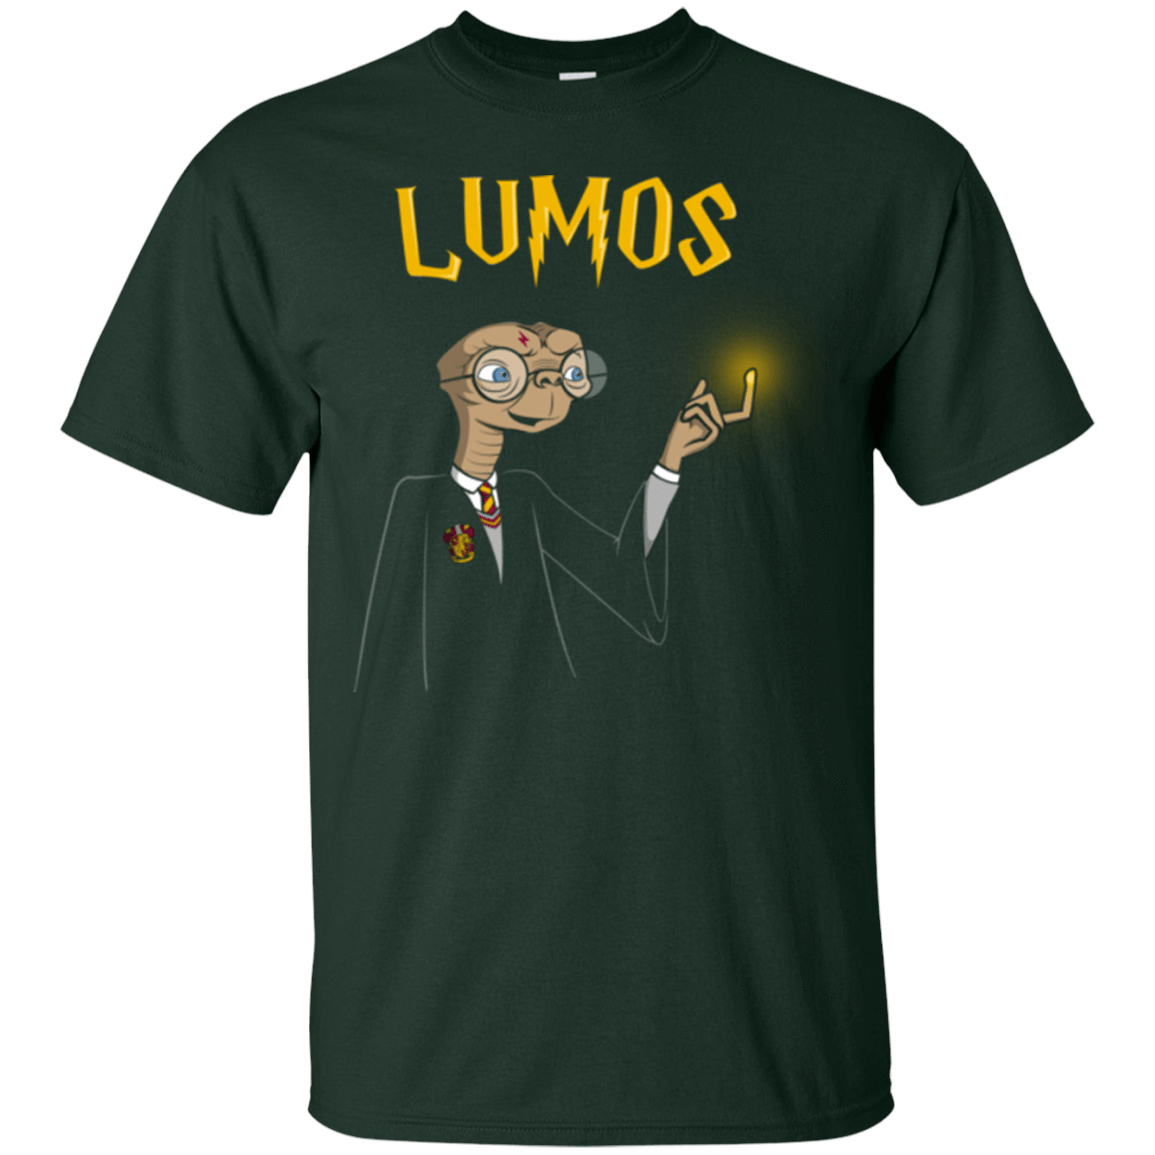 T-Shirts Forest / Small Lumos T-Shirt